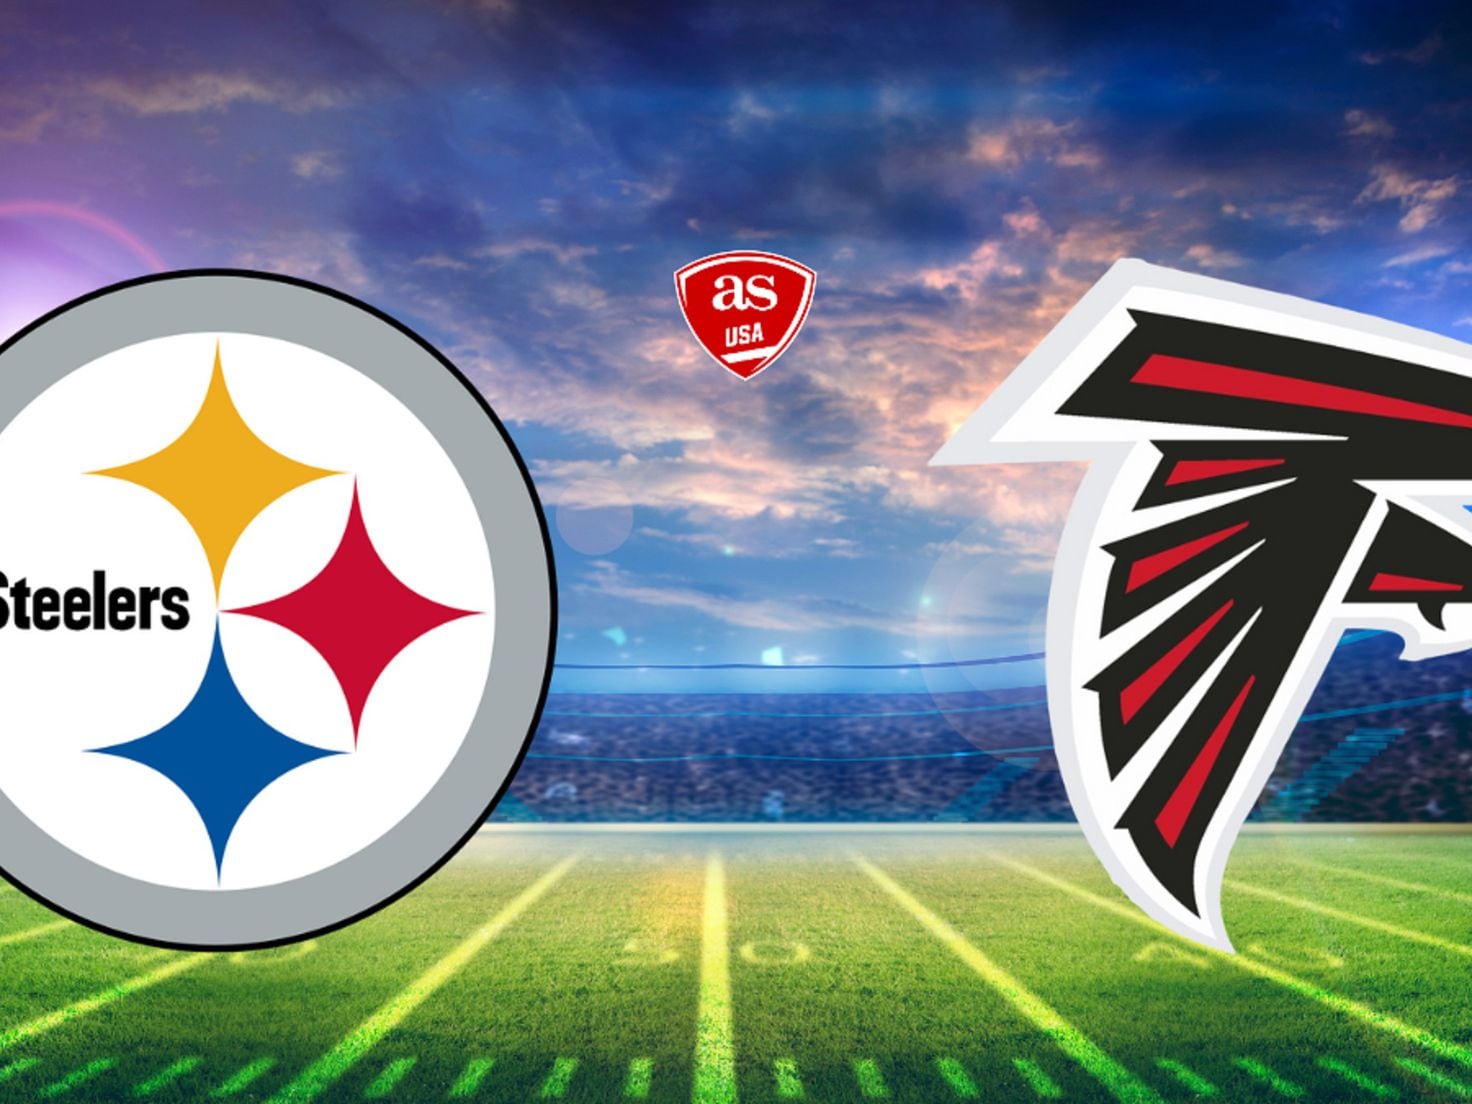 Steelers vs. Falcons: How to watch, game time, TV schedule